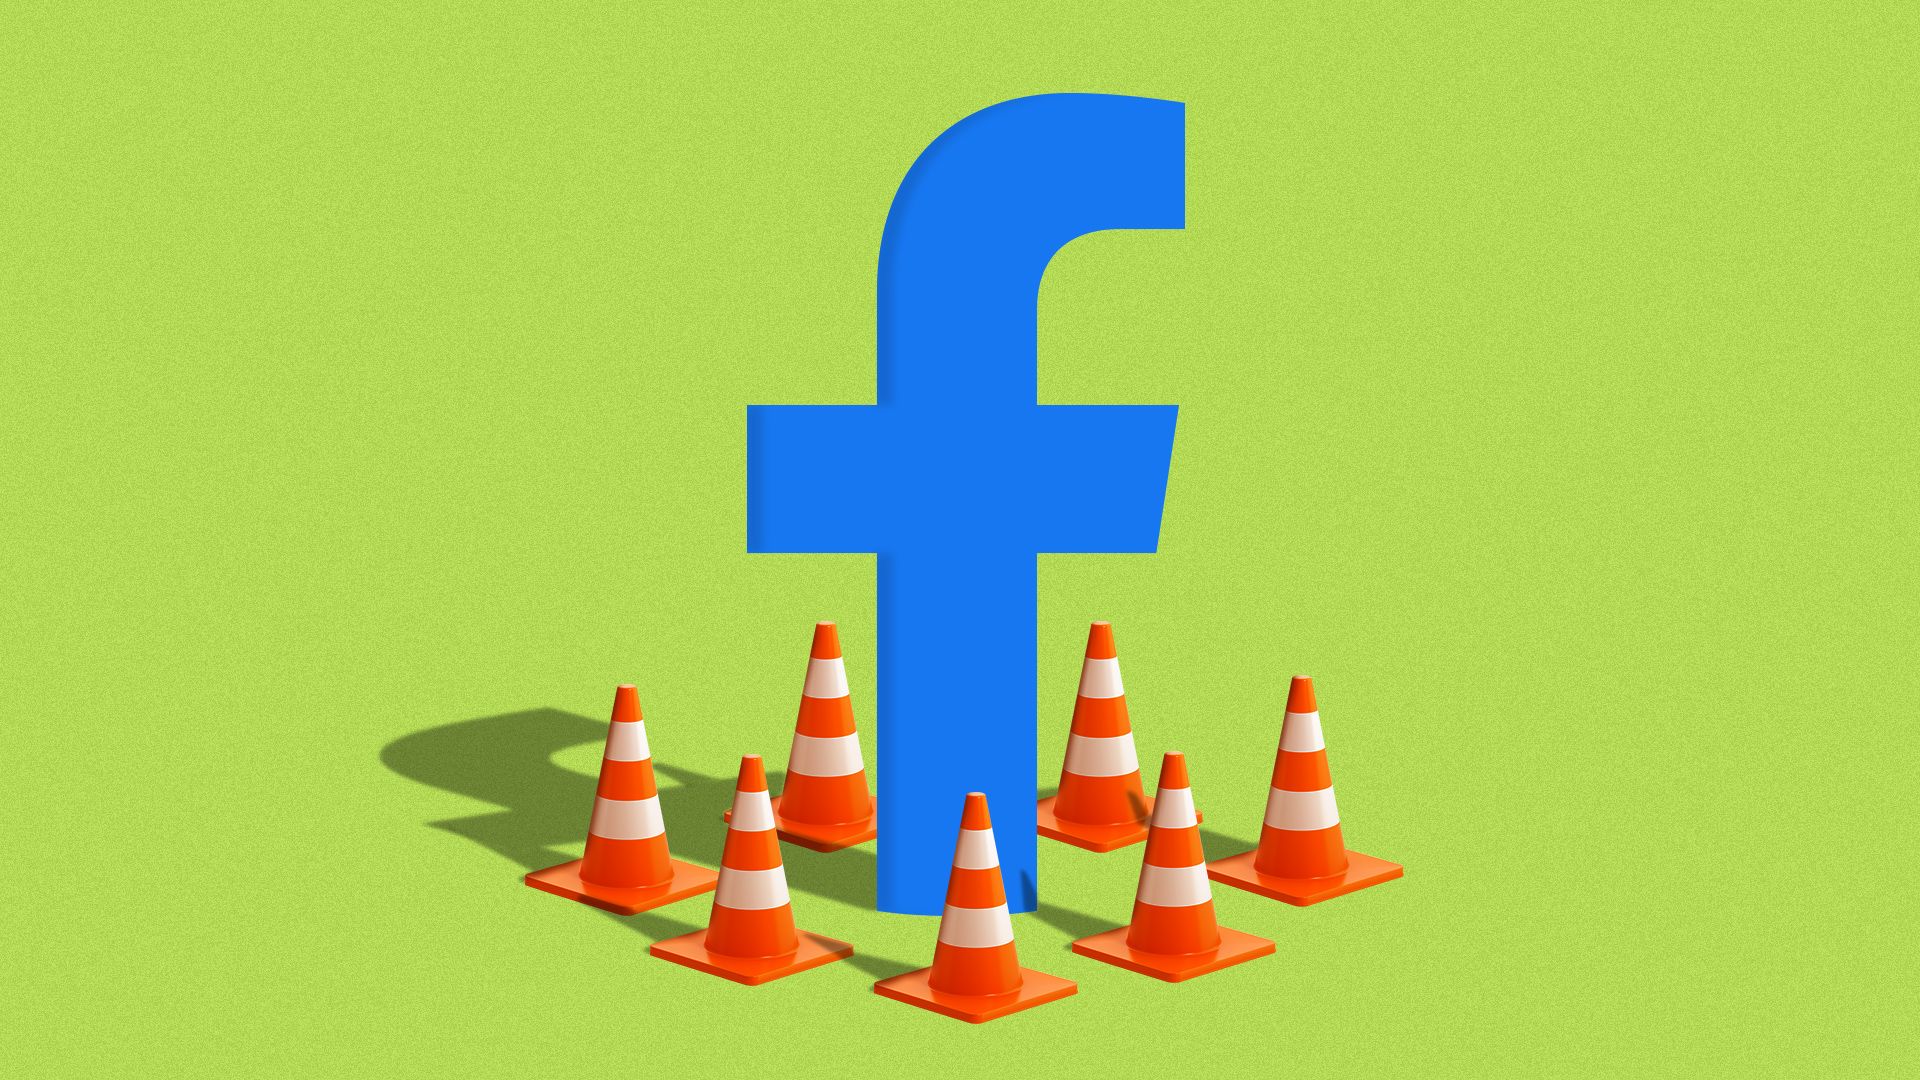  Illustration of the Facebook "f" surrounded by orange cones.   